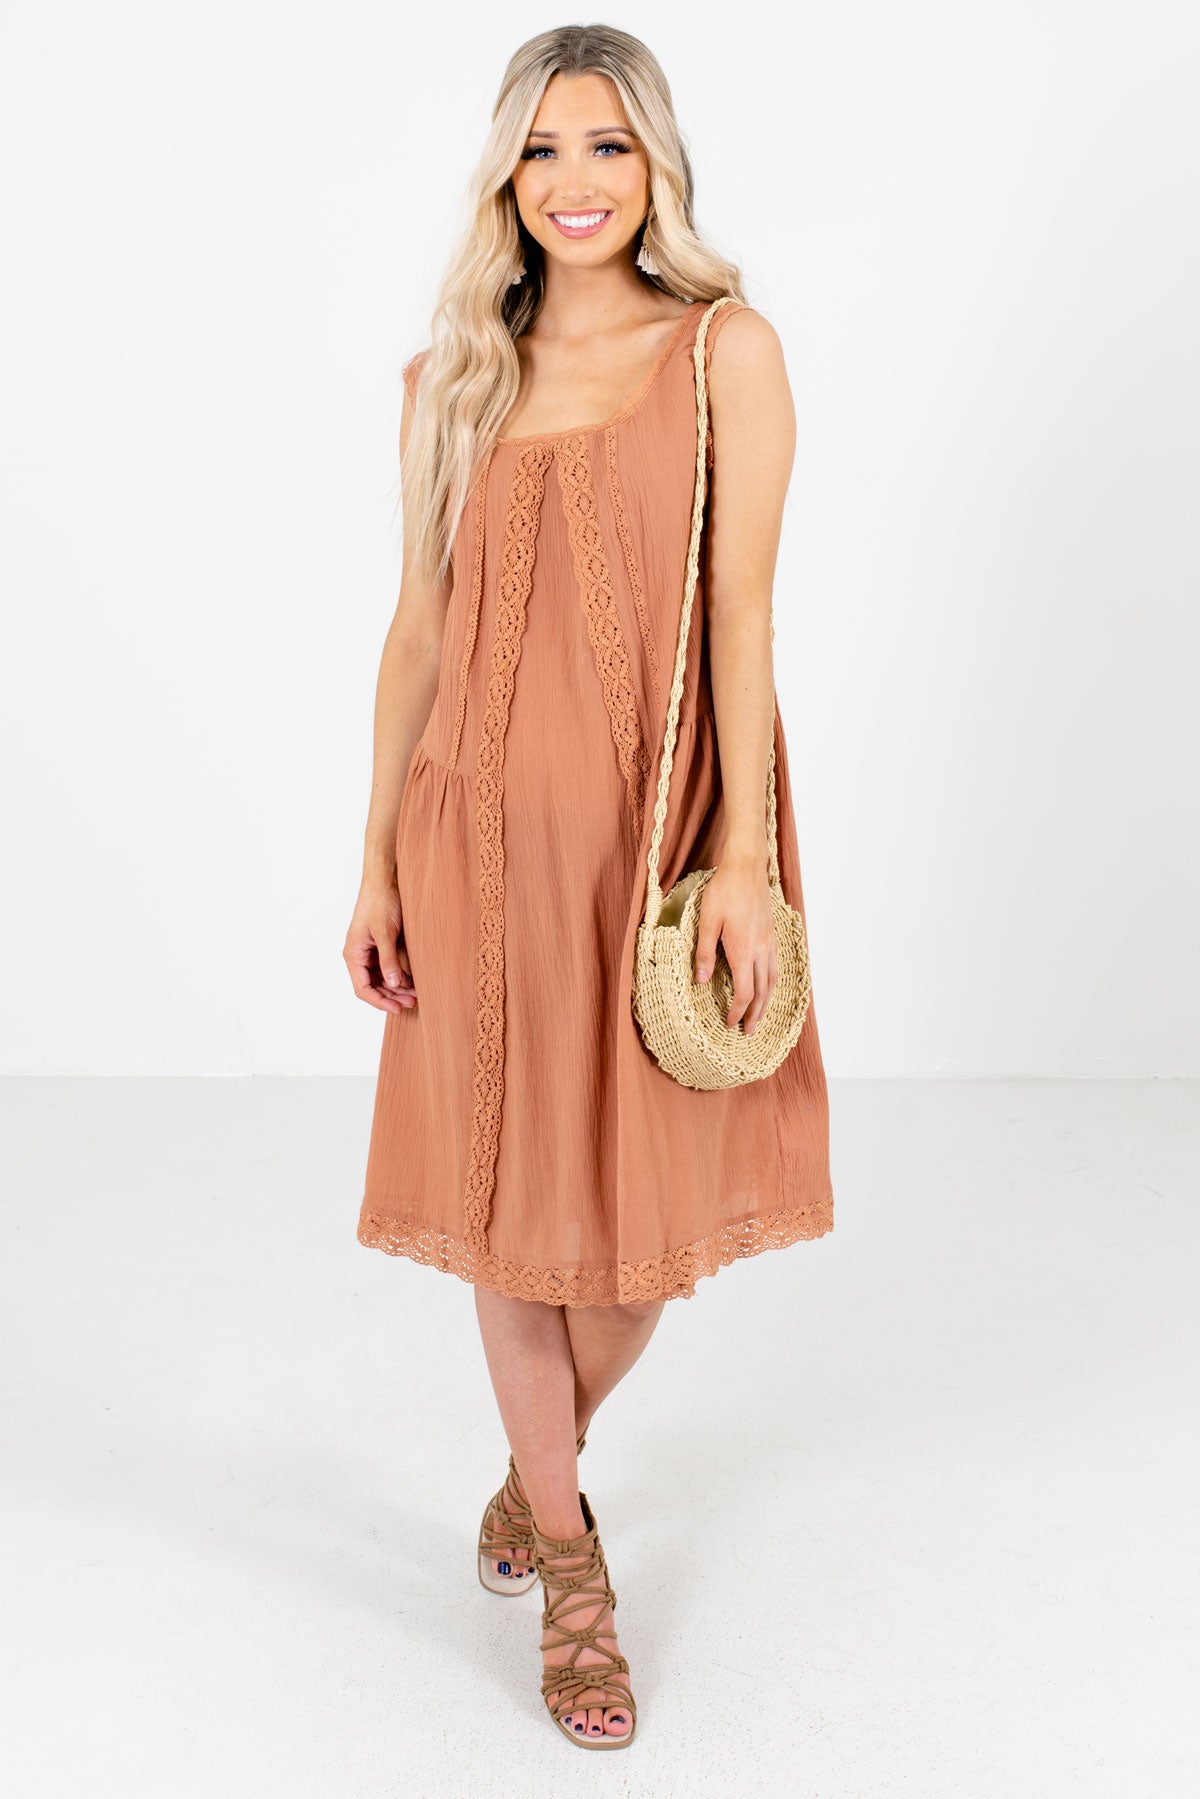 Muted Orange Affordable Online Boutique Clothing for Women